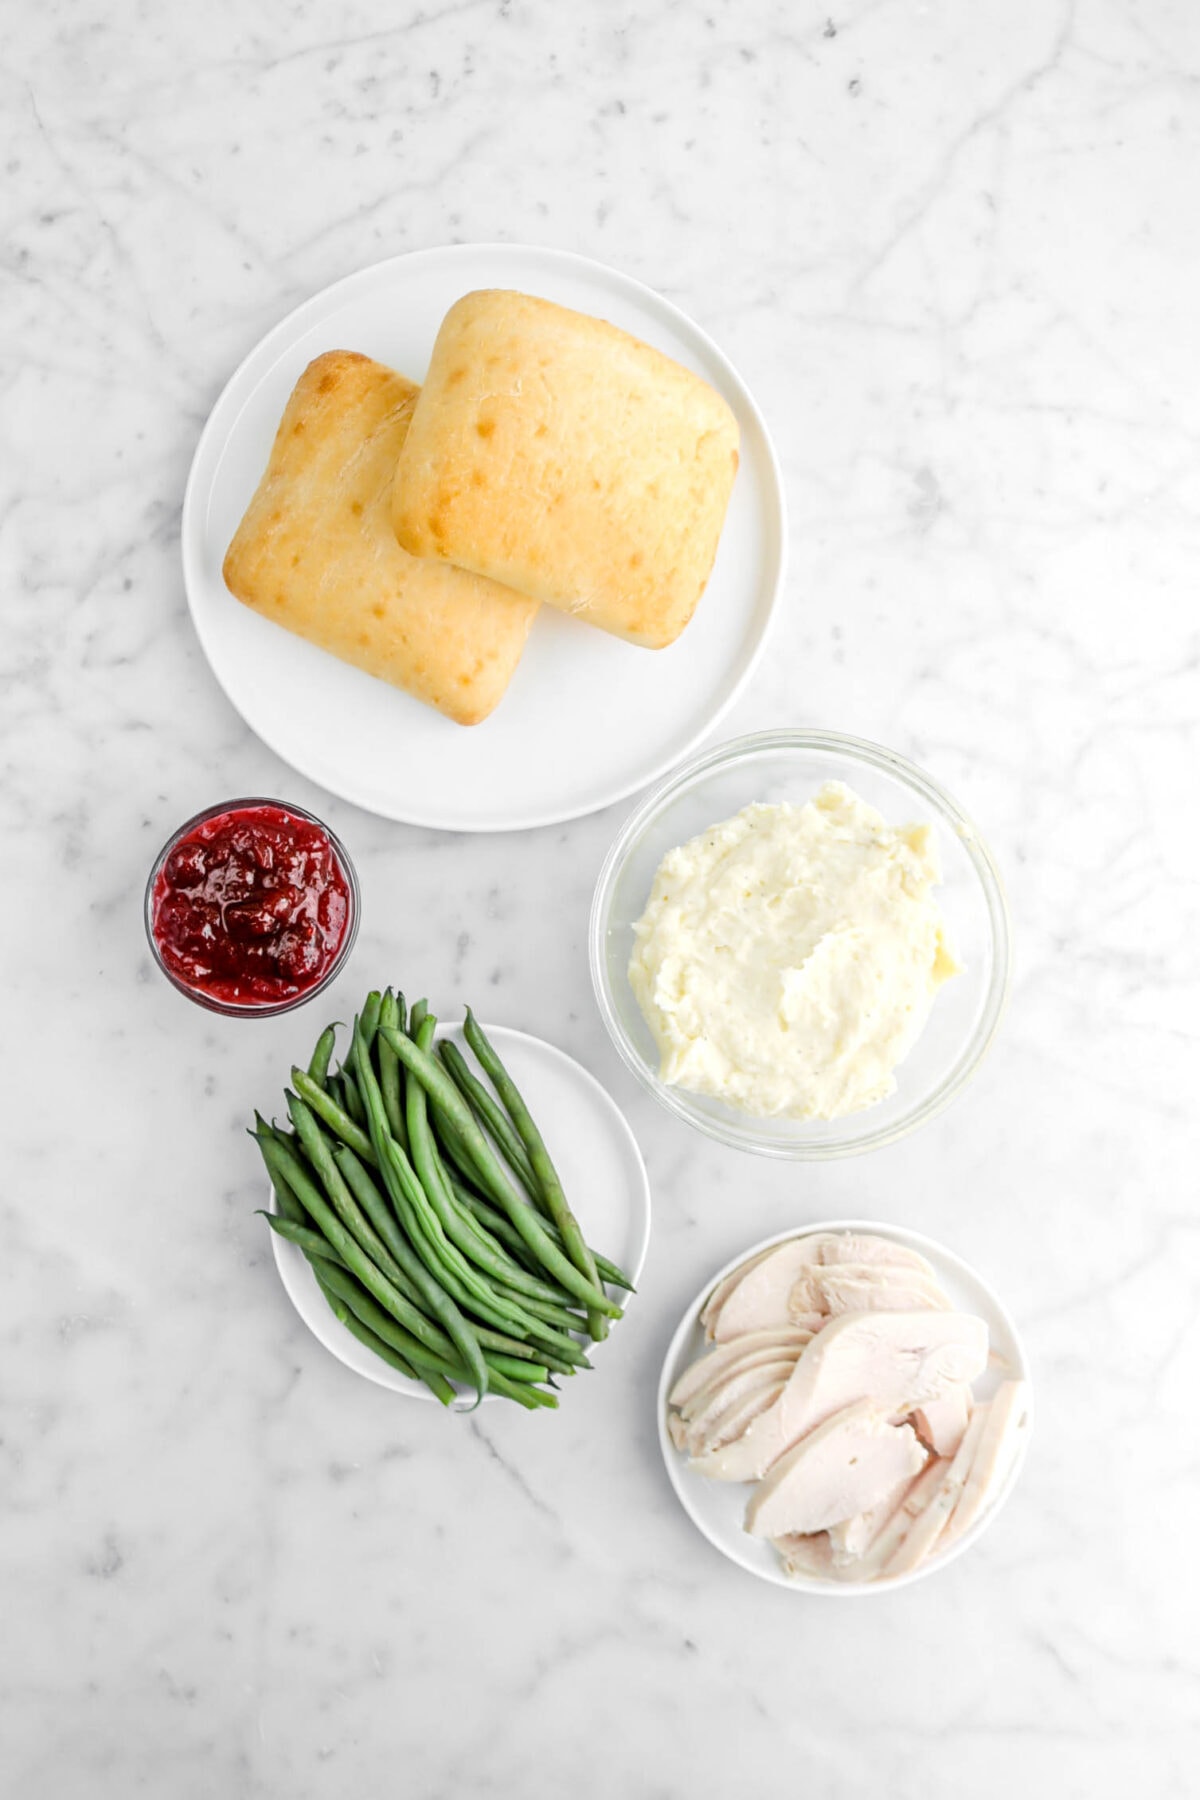 two ciabatta rolls, cranberry sauce, mashed potatoes, green beans, and sliced turkey on marble surface.